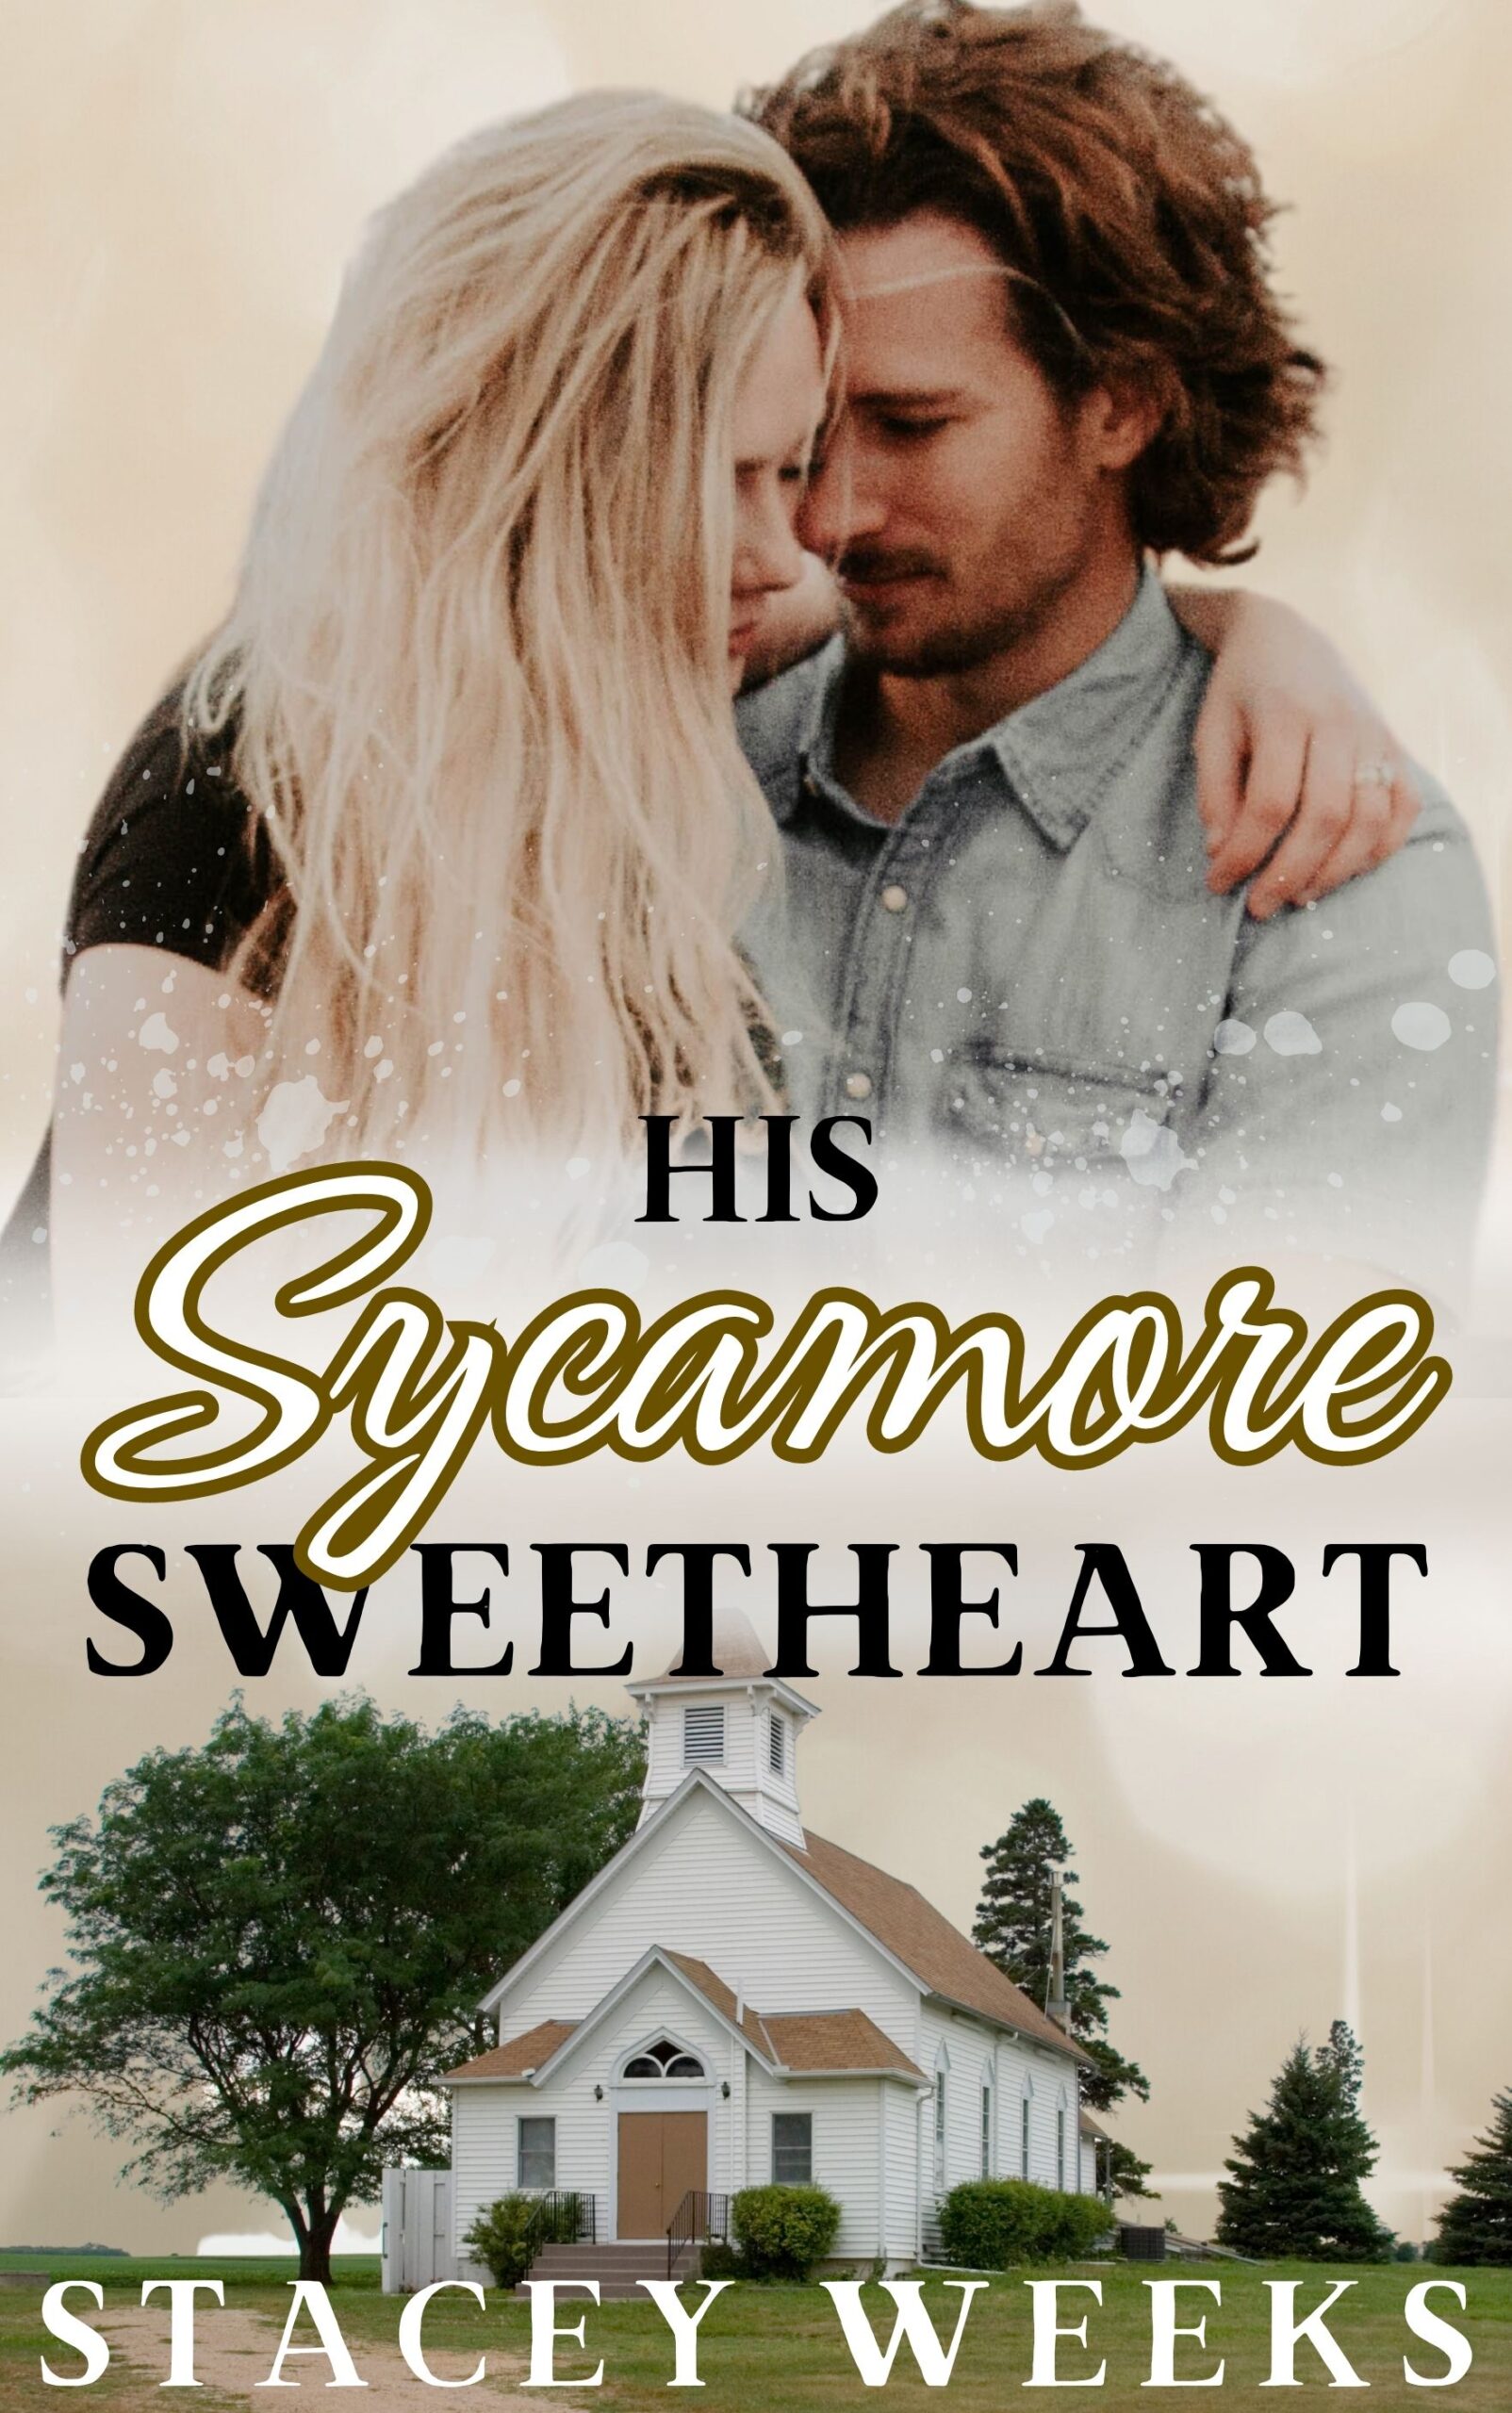 His Sycamore Sweetheart